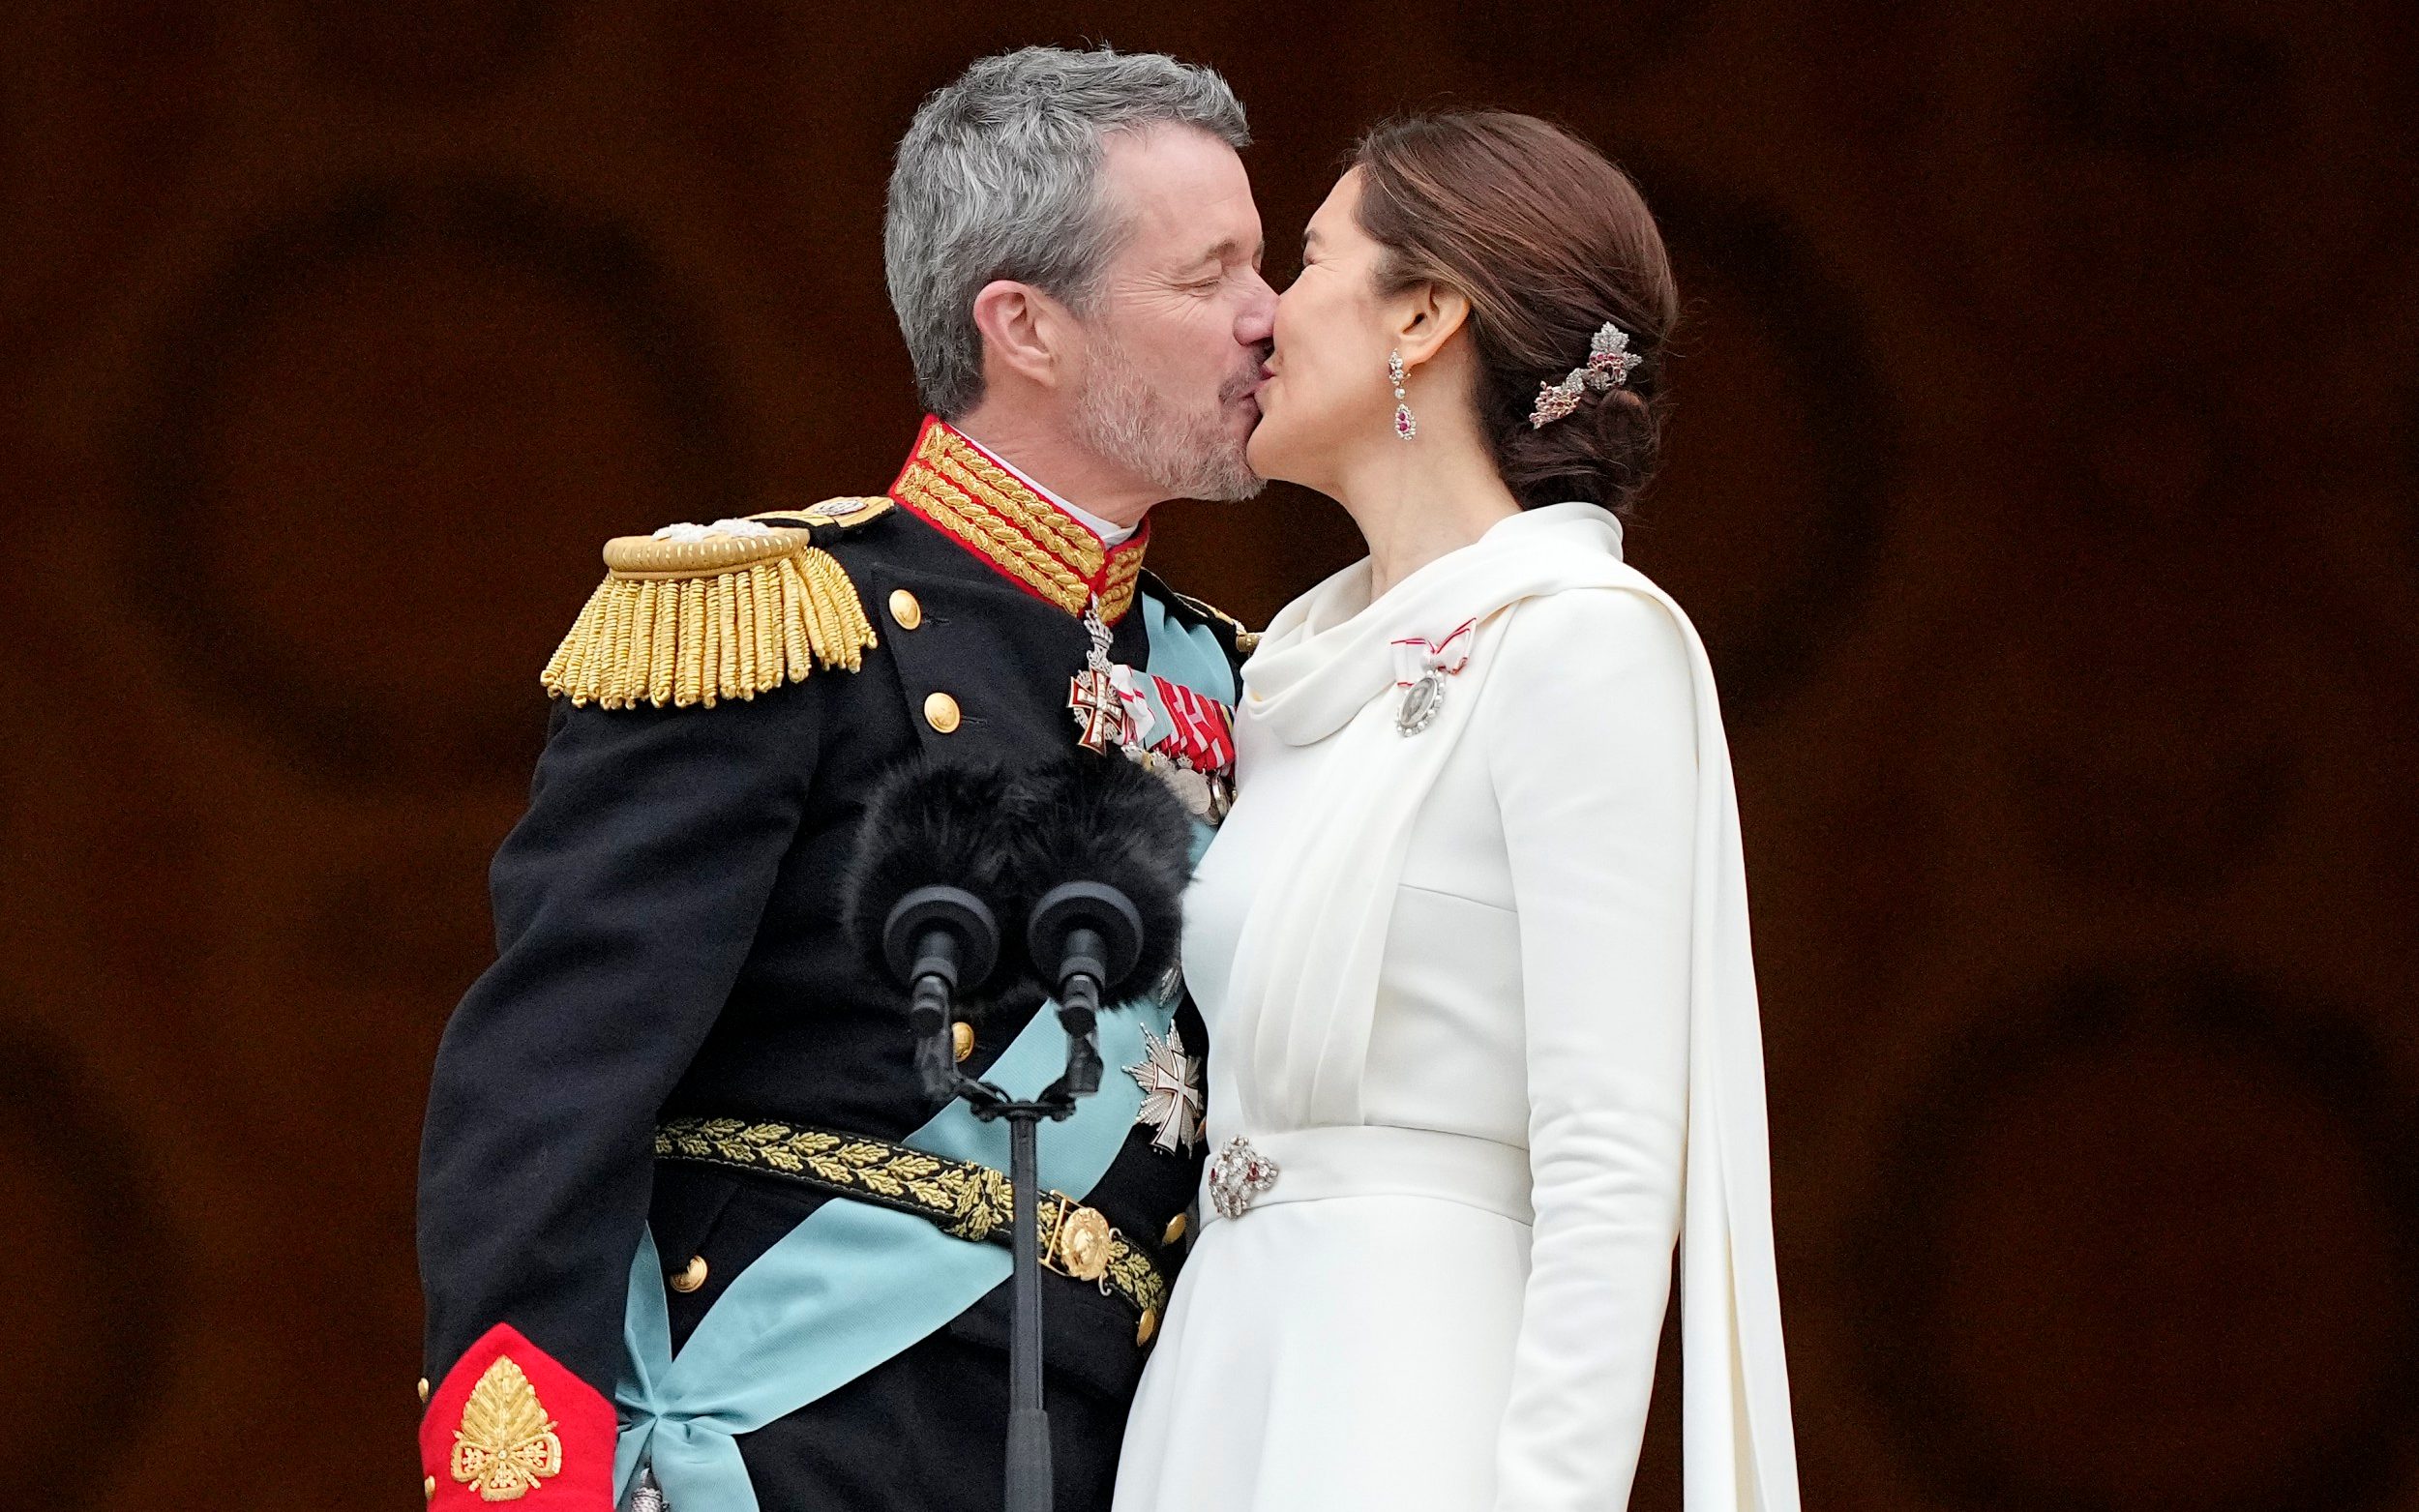 new danish king seals accession with awkward kiss on palace balcony